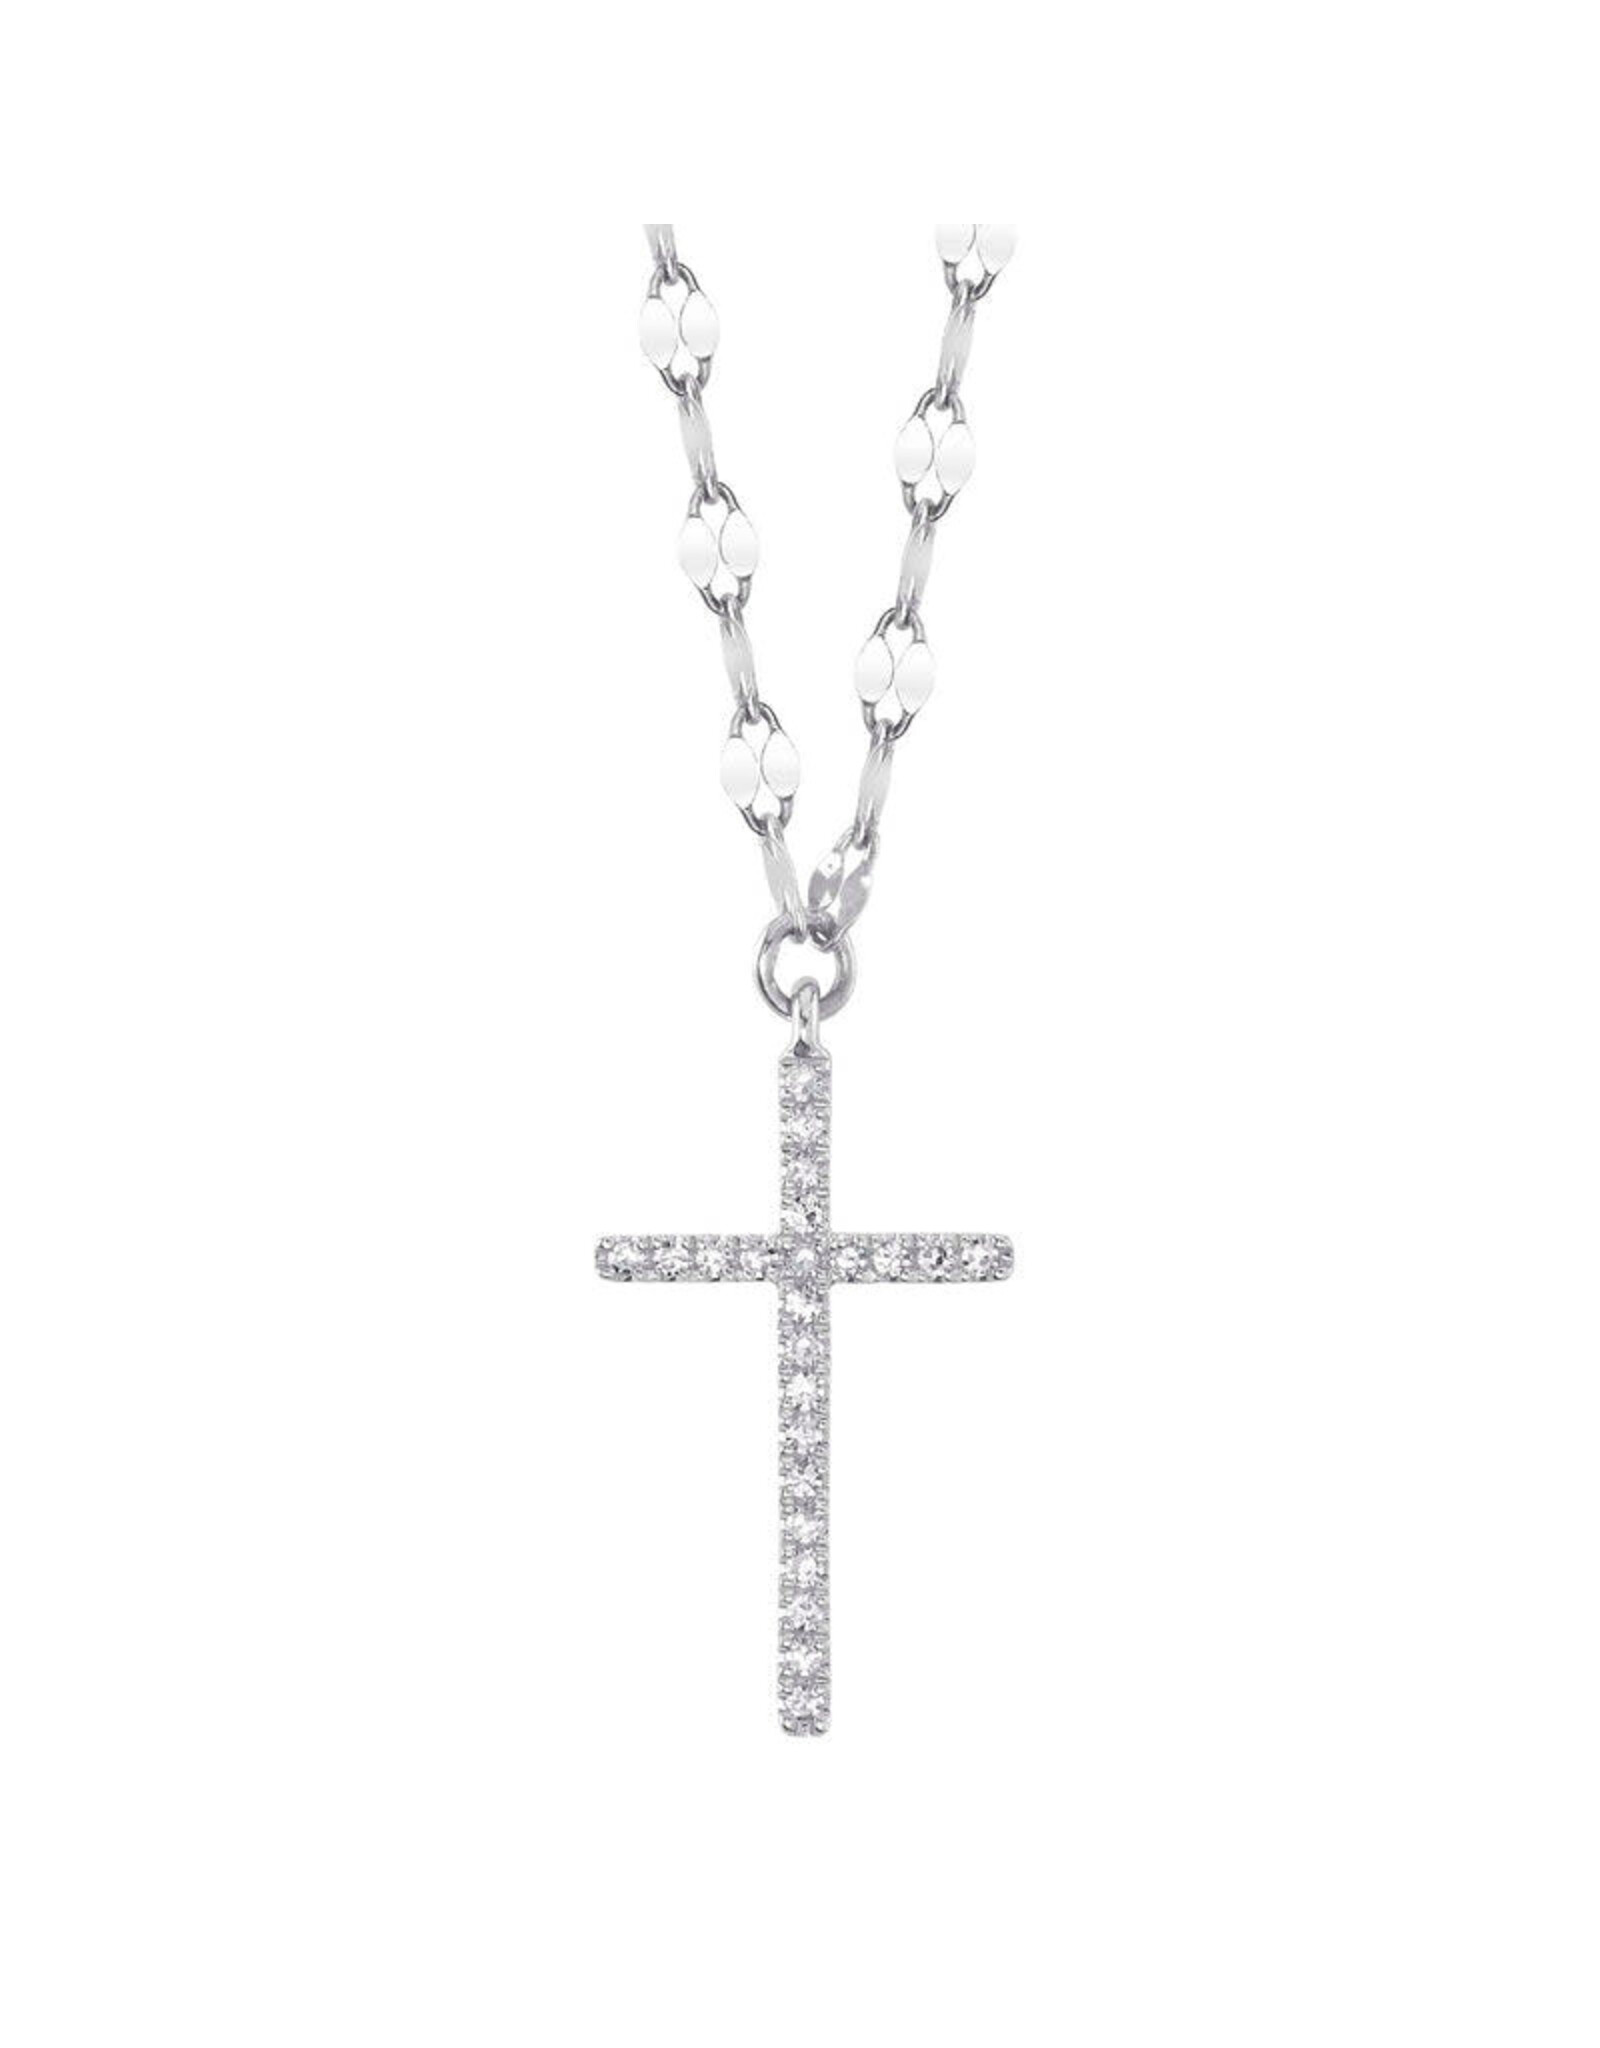 14K White Gold Diamond Cross with Fancy Chain, D: 0.06ct